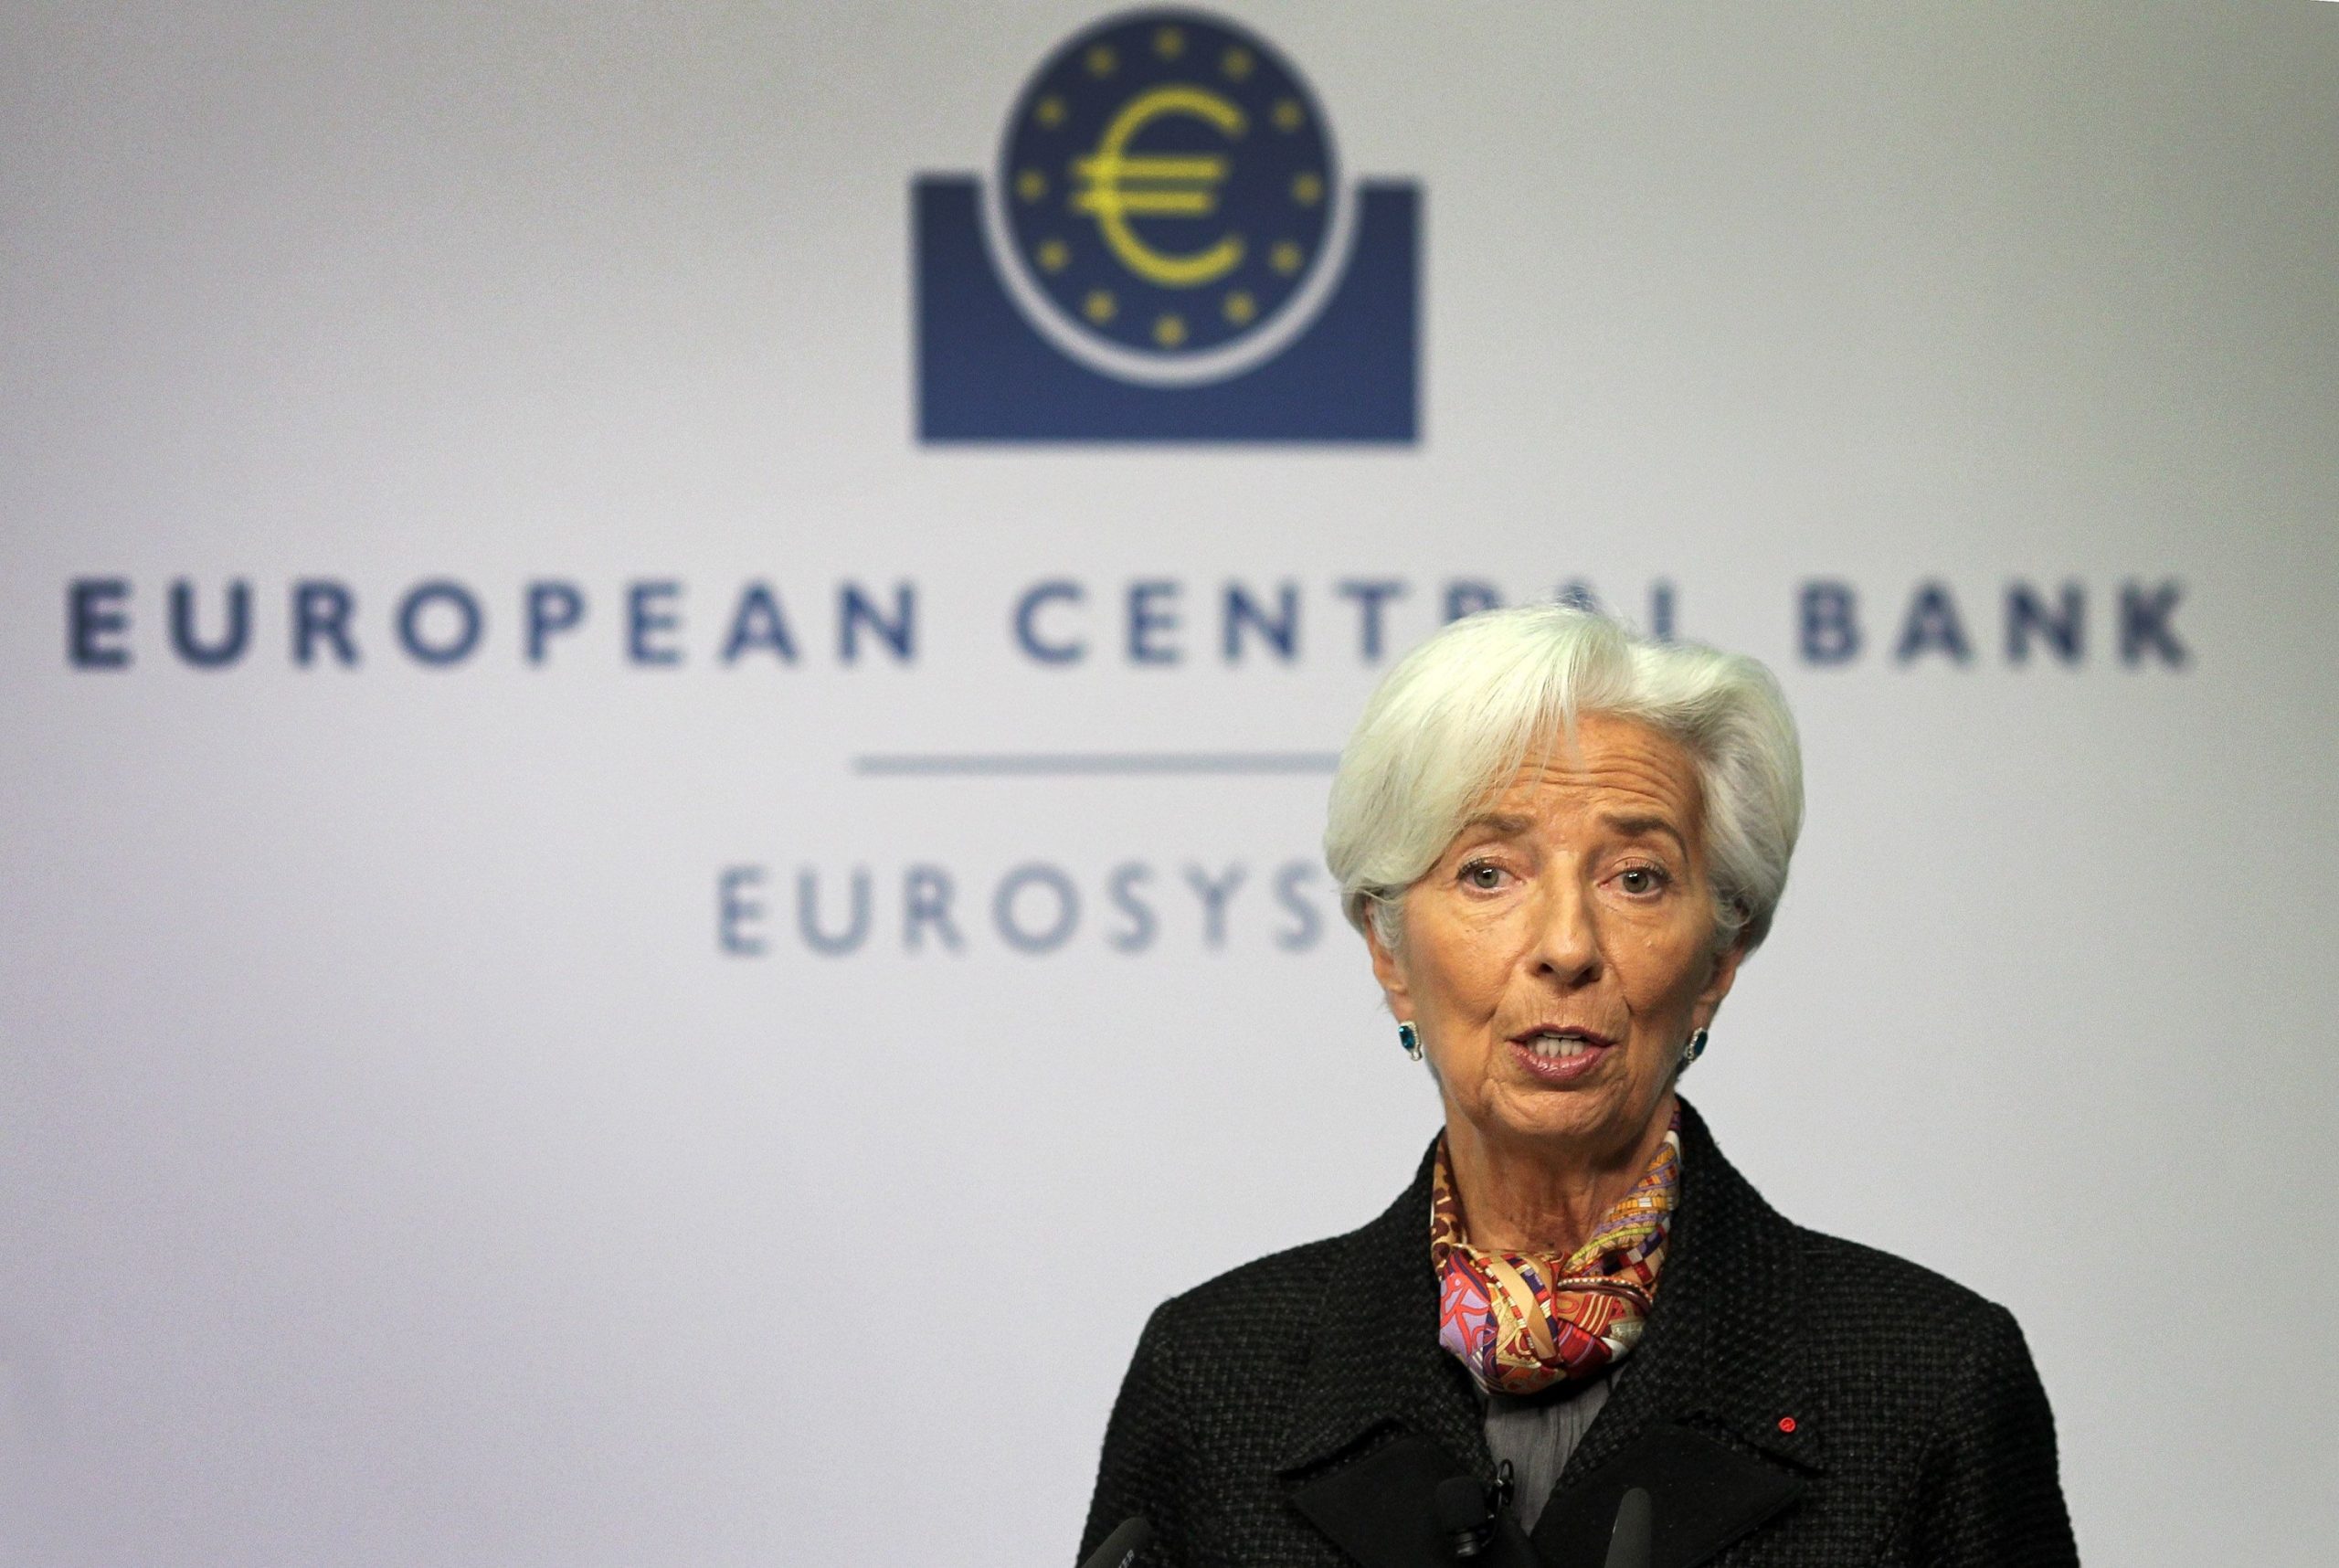 ECB Chief Christine Lagarde Says Her Son Lost Heavily On Crypto Investments